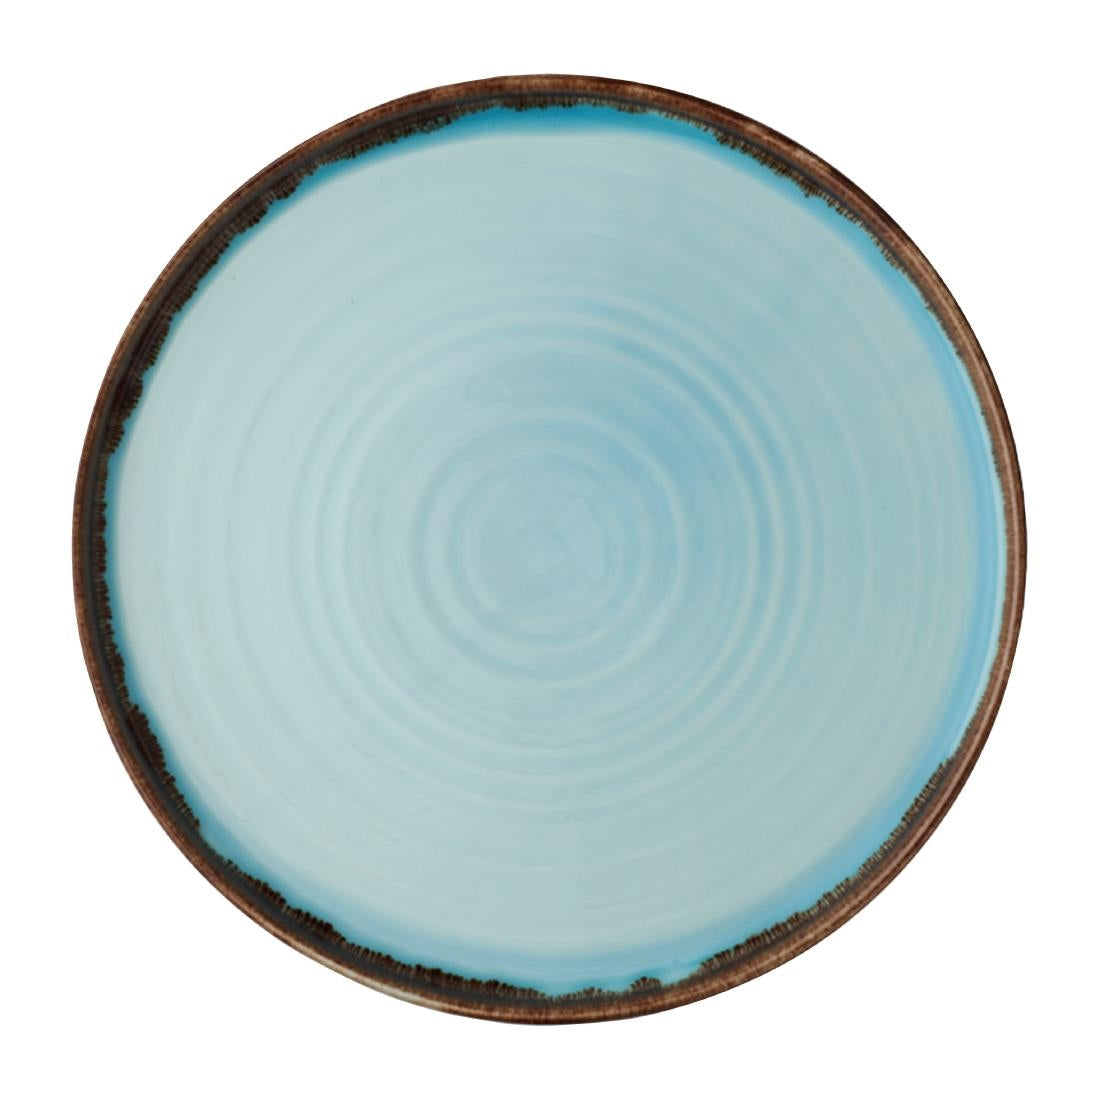 FX170 Dudson Harvest Walled Plates Turquoise 260mm (Pack of 6) JD Catering Equipment Solutions Ltd